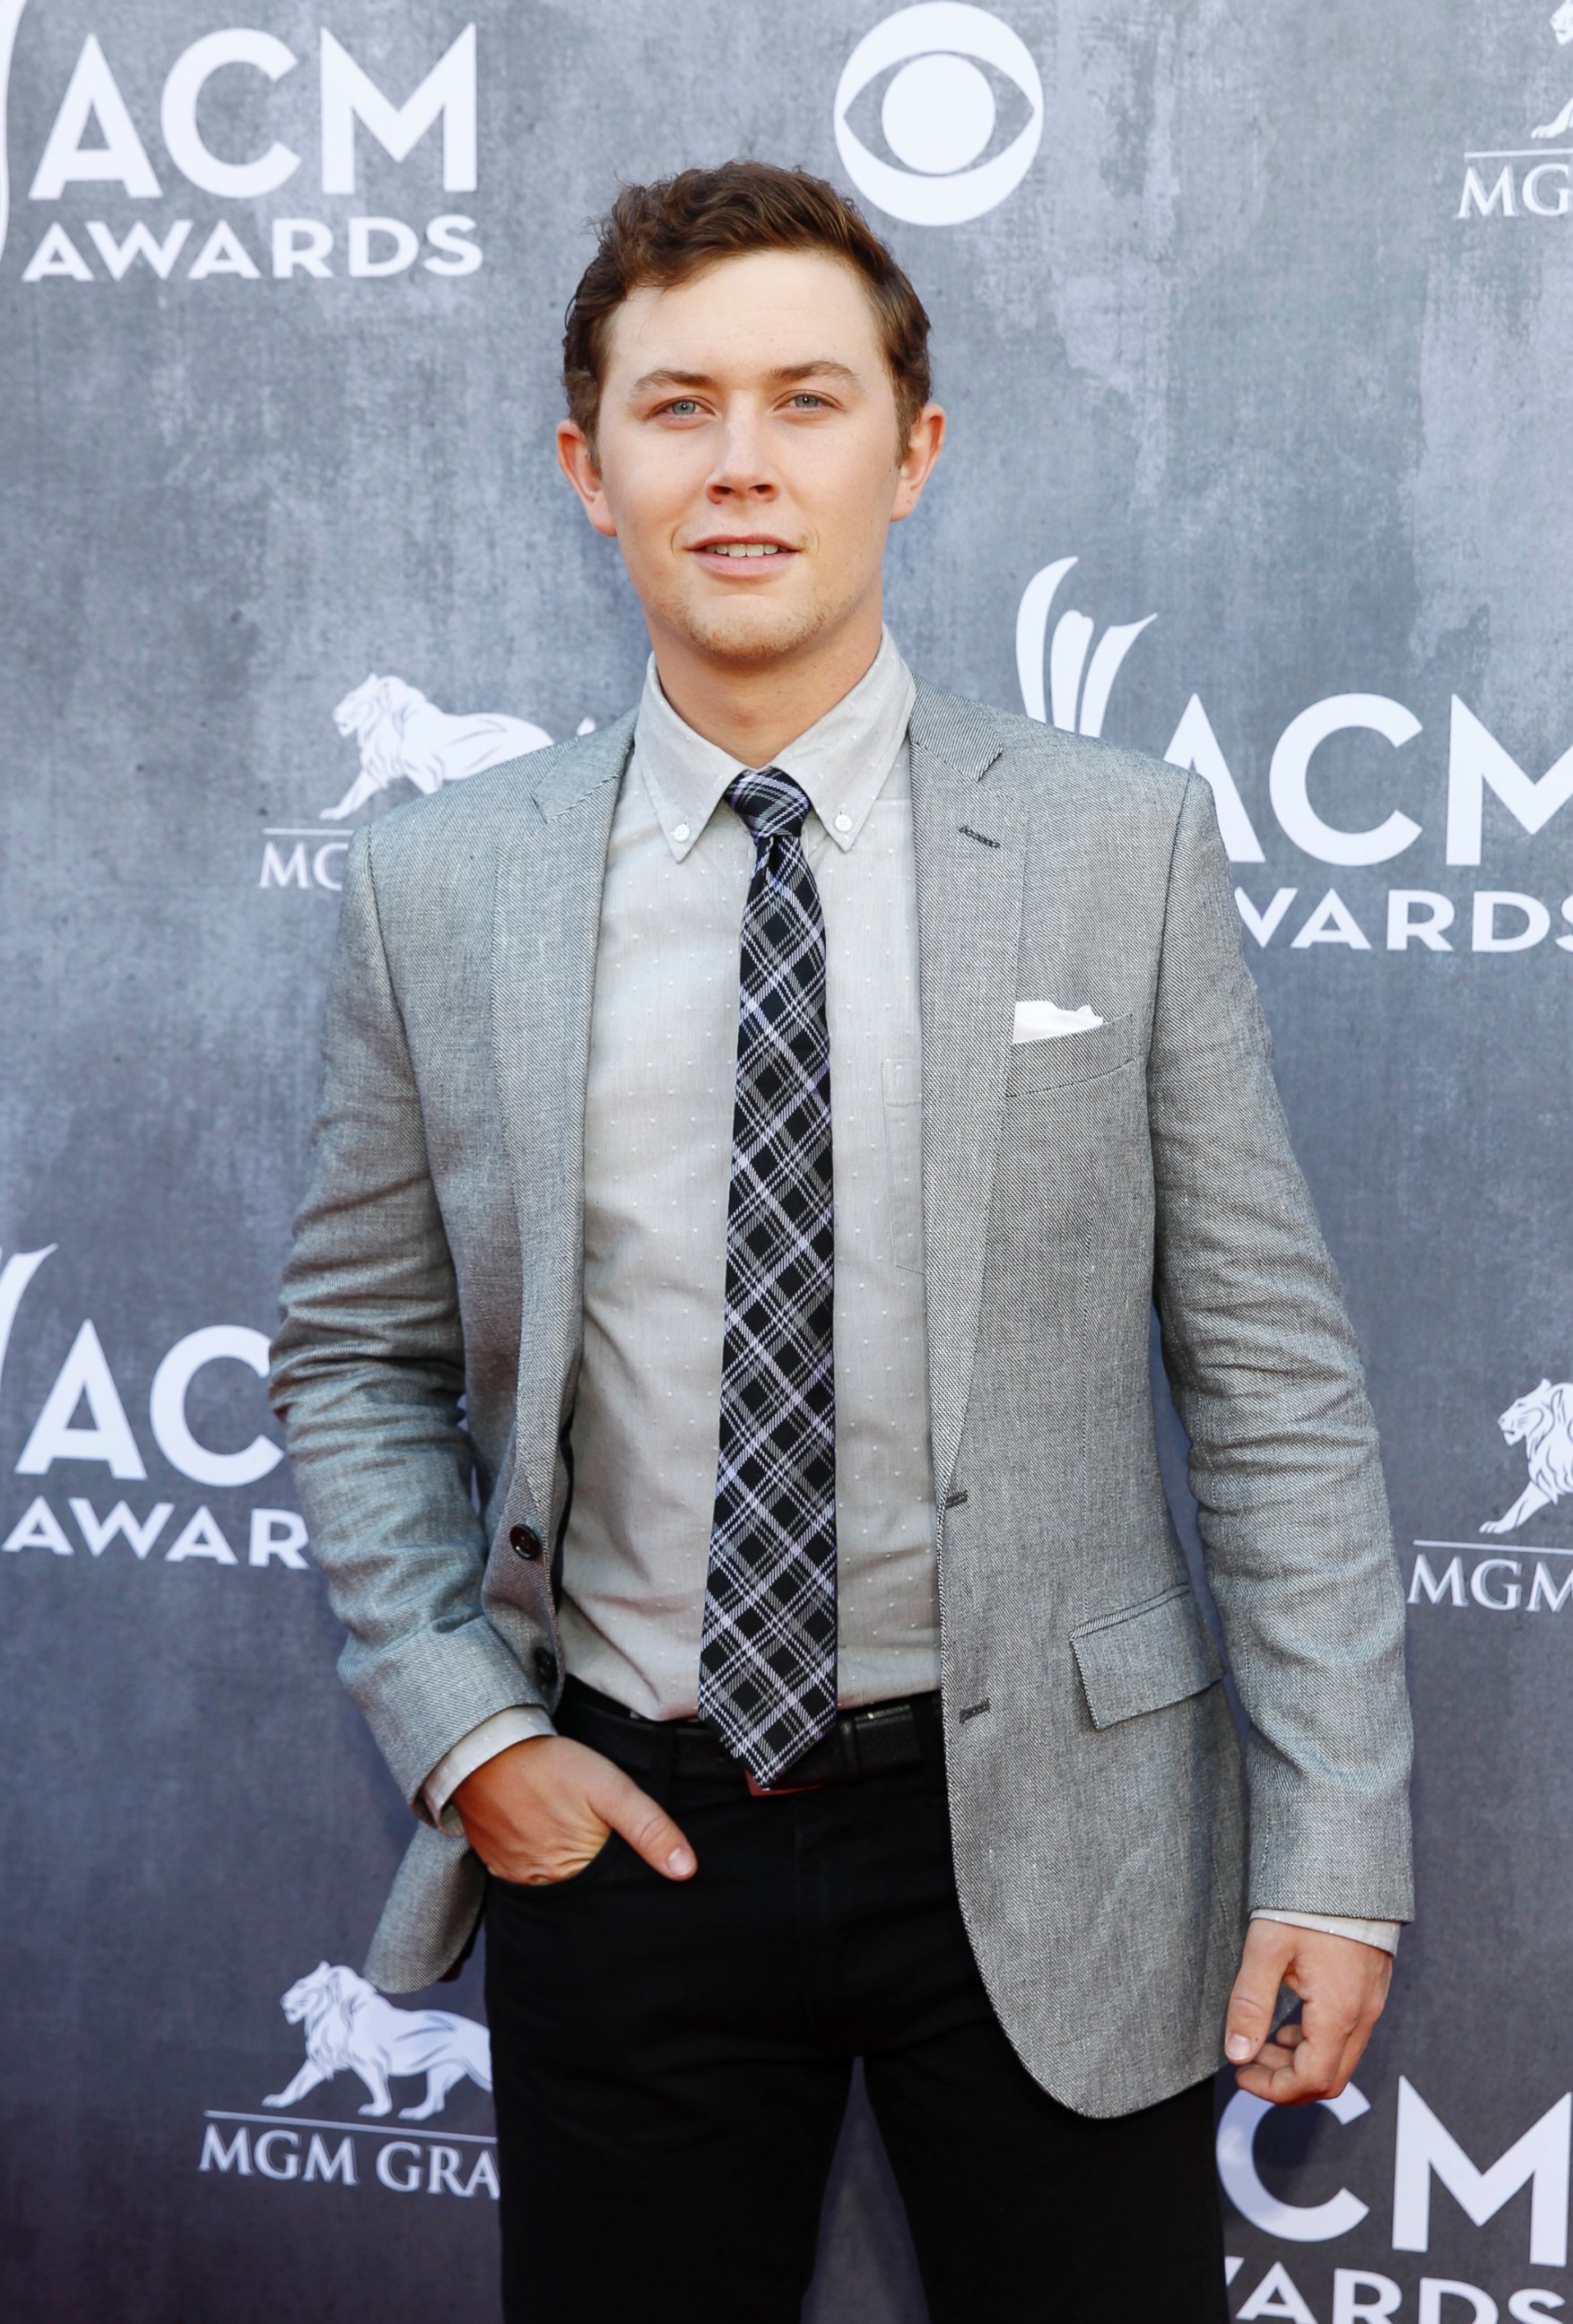 PHOTO: Country music singer Scotty McCreery arrives at the 49th Annual Academy of Country Music Awards in Las Vegas, Nevada April 6, 2014.  